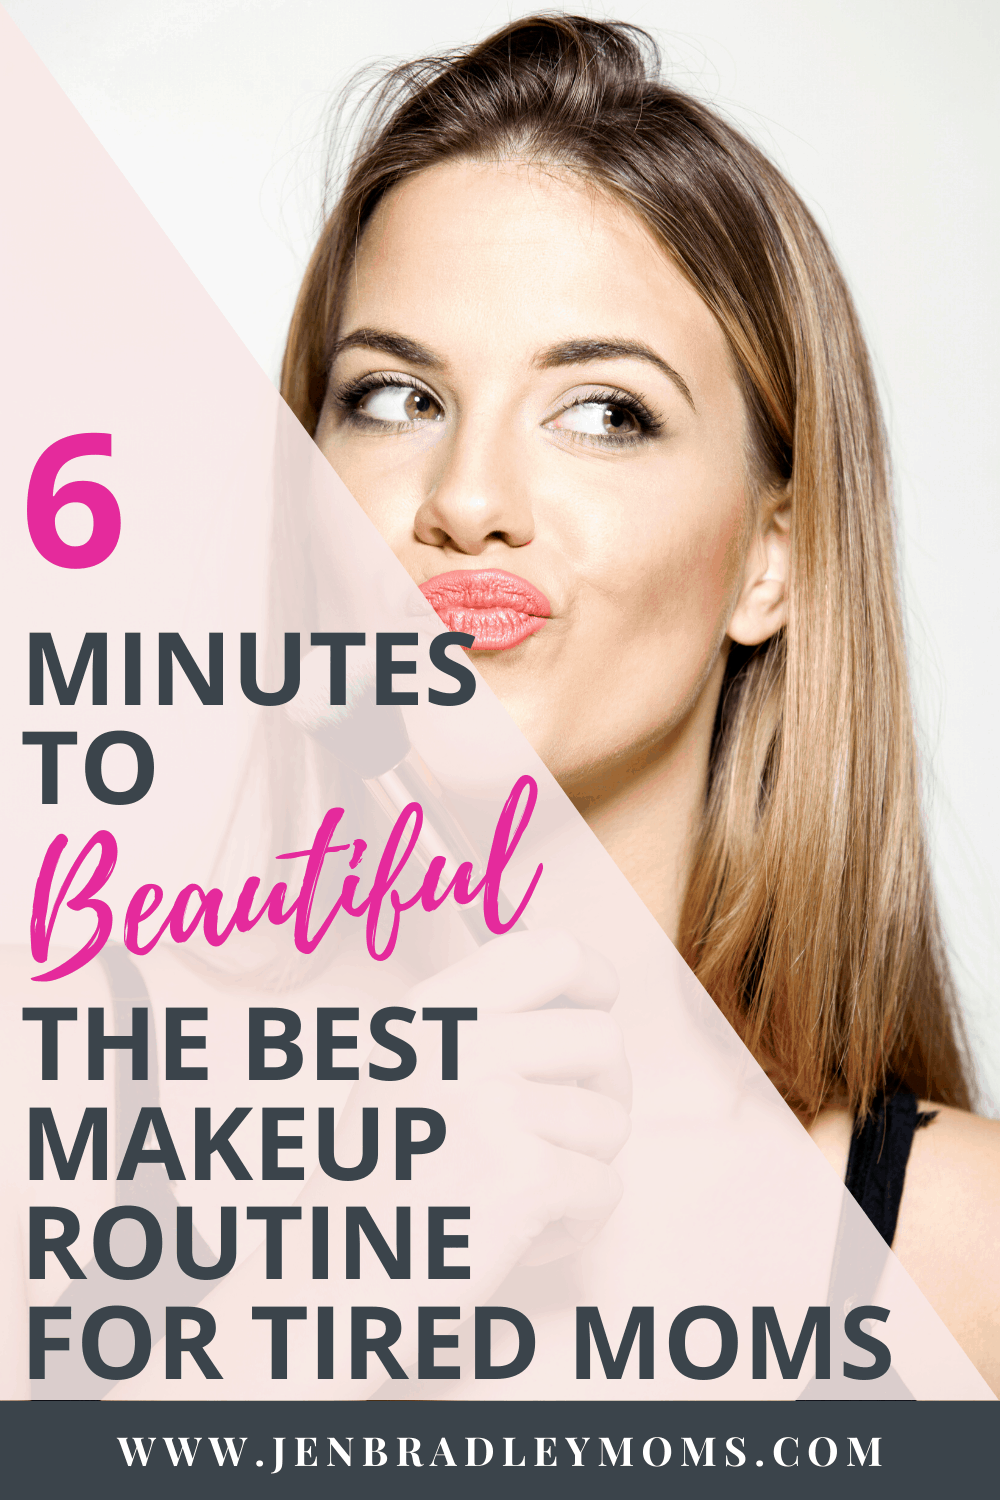 6 Minutes to Beautiful: The Best Makeup Routine for Tired Moms